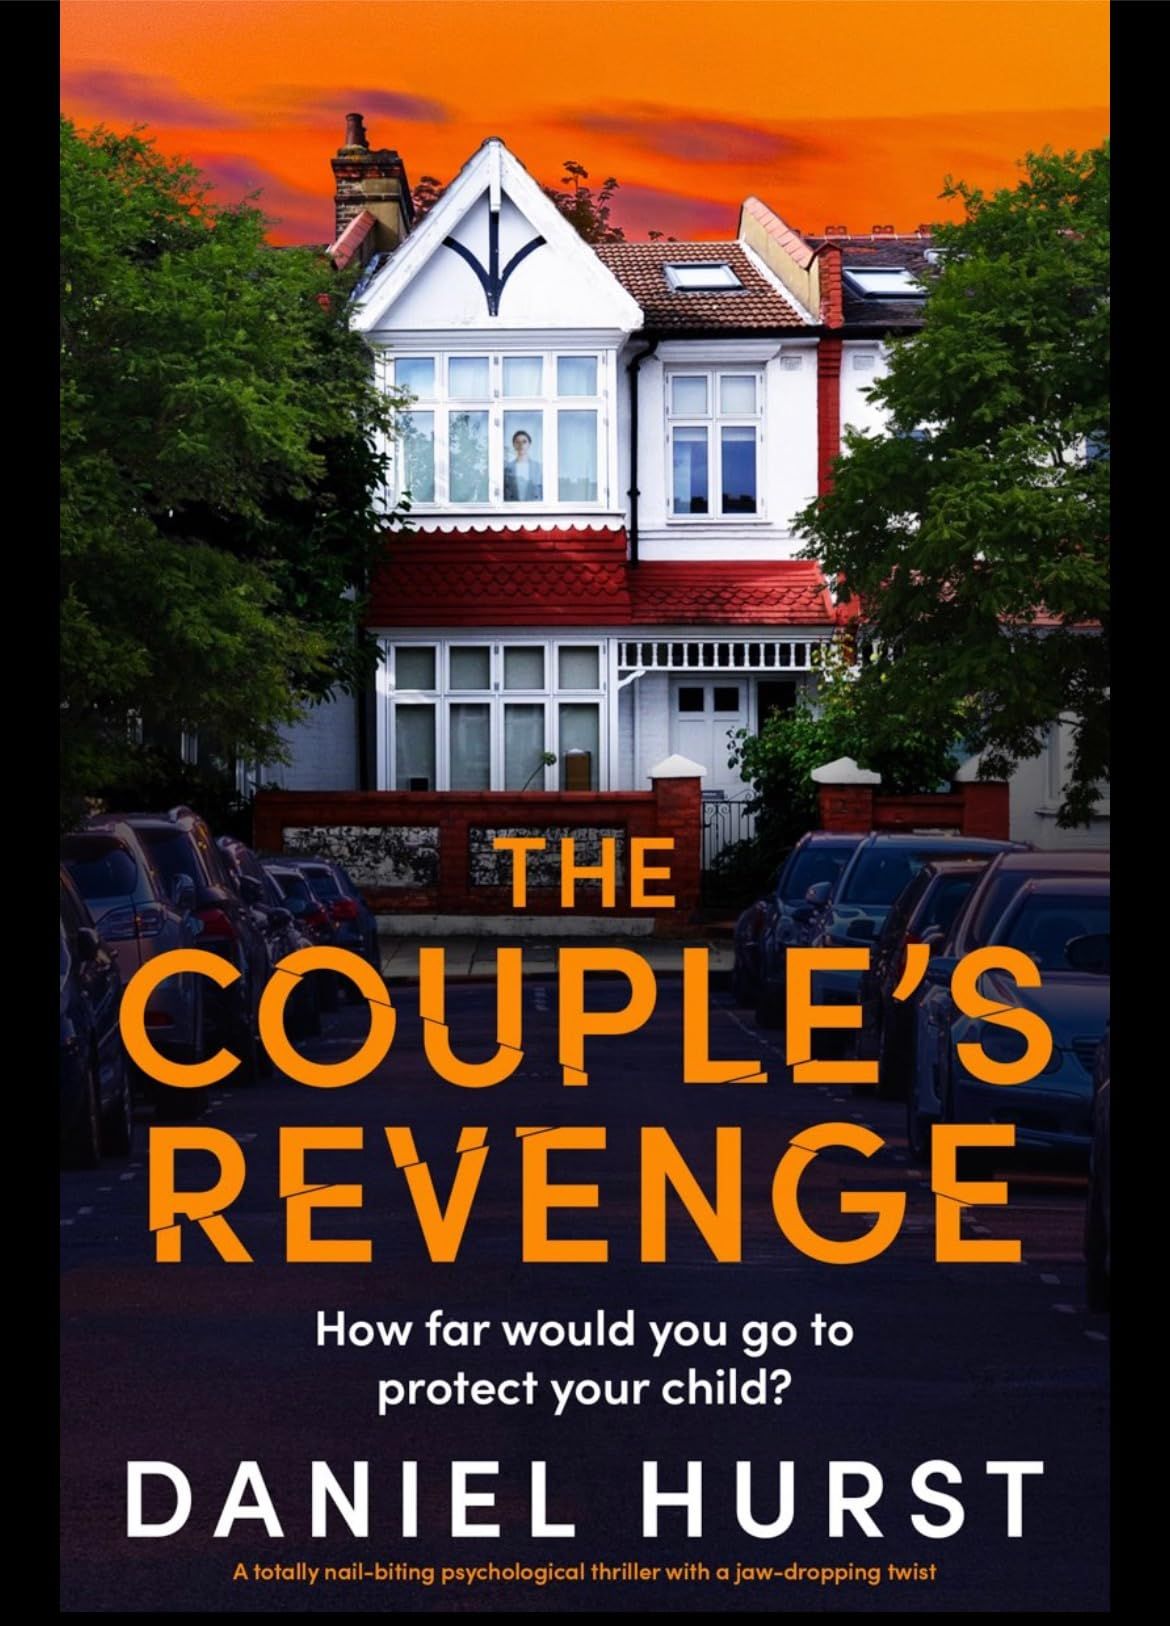 The Couple's Revenge: A totally nail-biting psychological thriller with a jaw-dropping twist | Amazon (US)